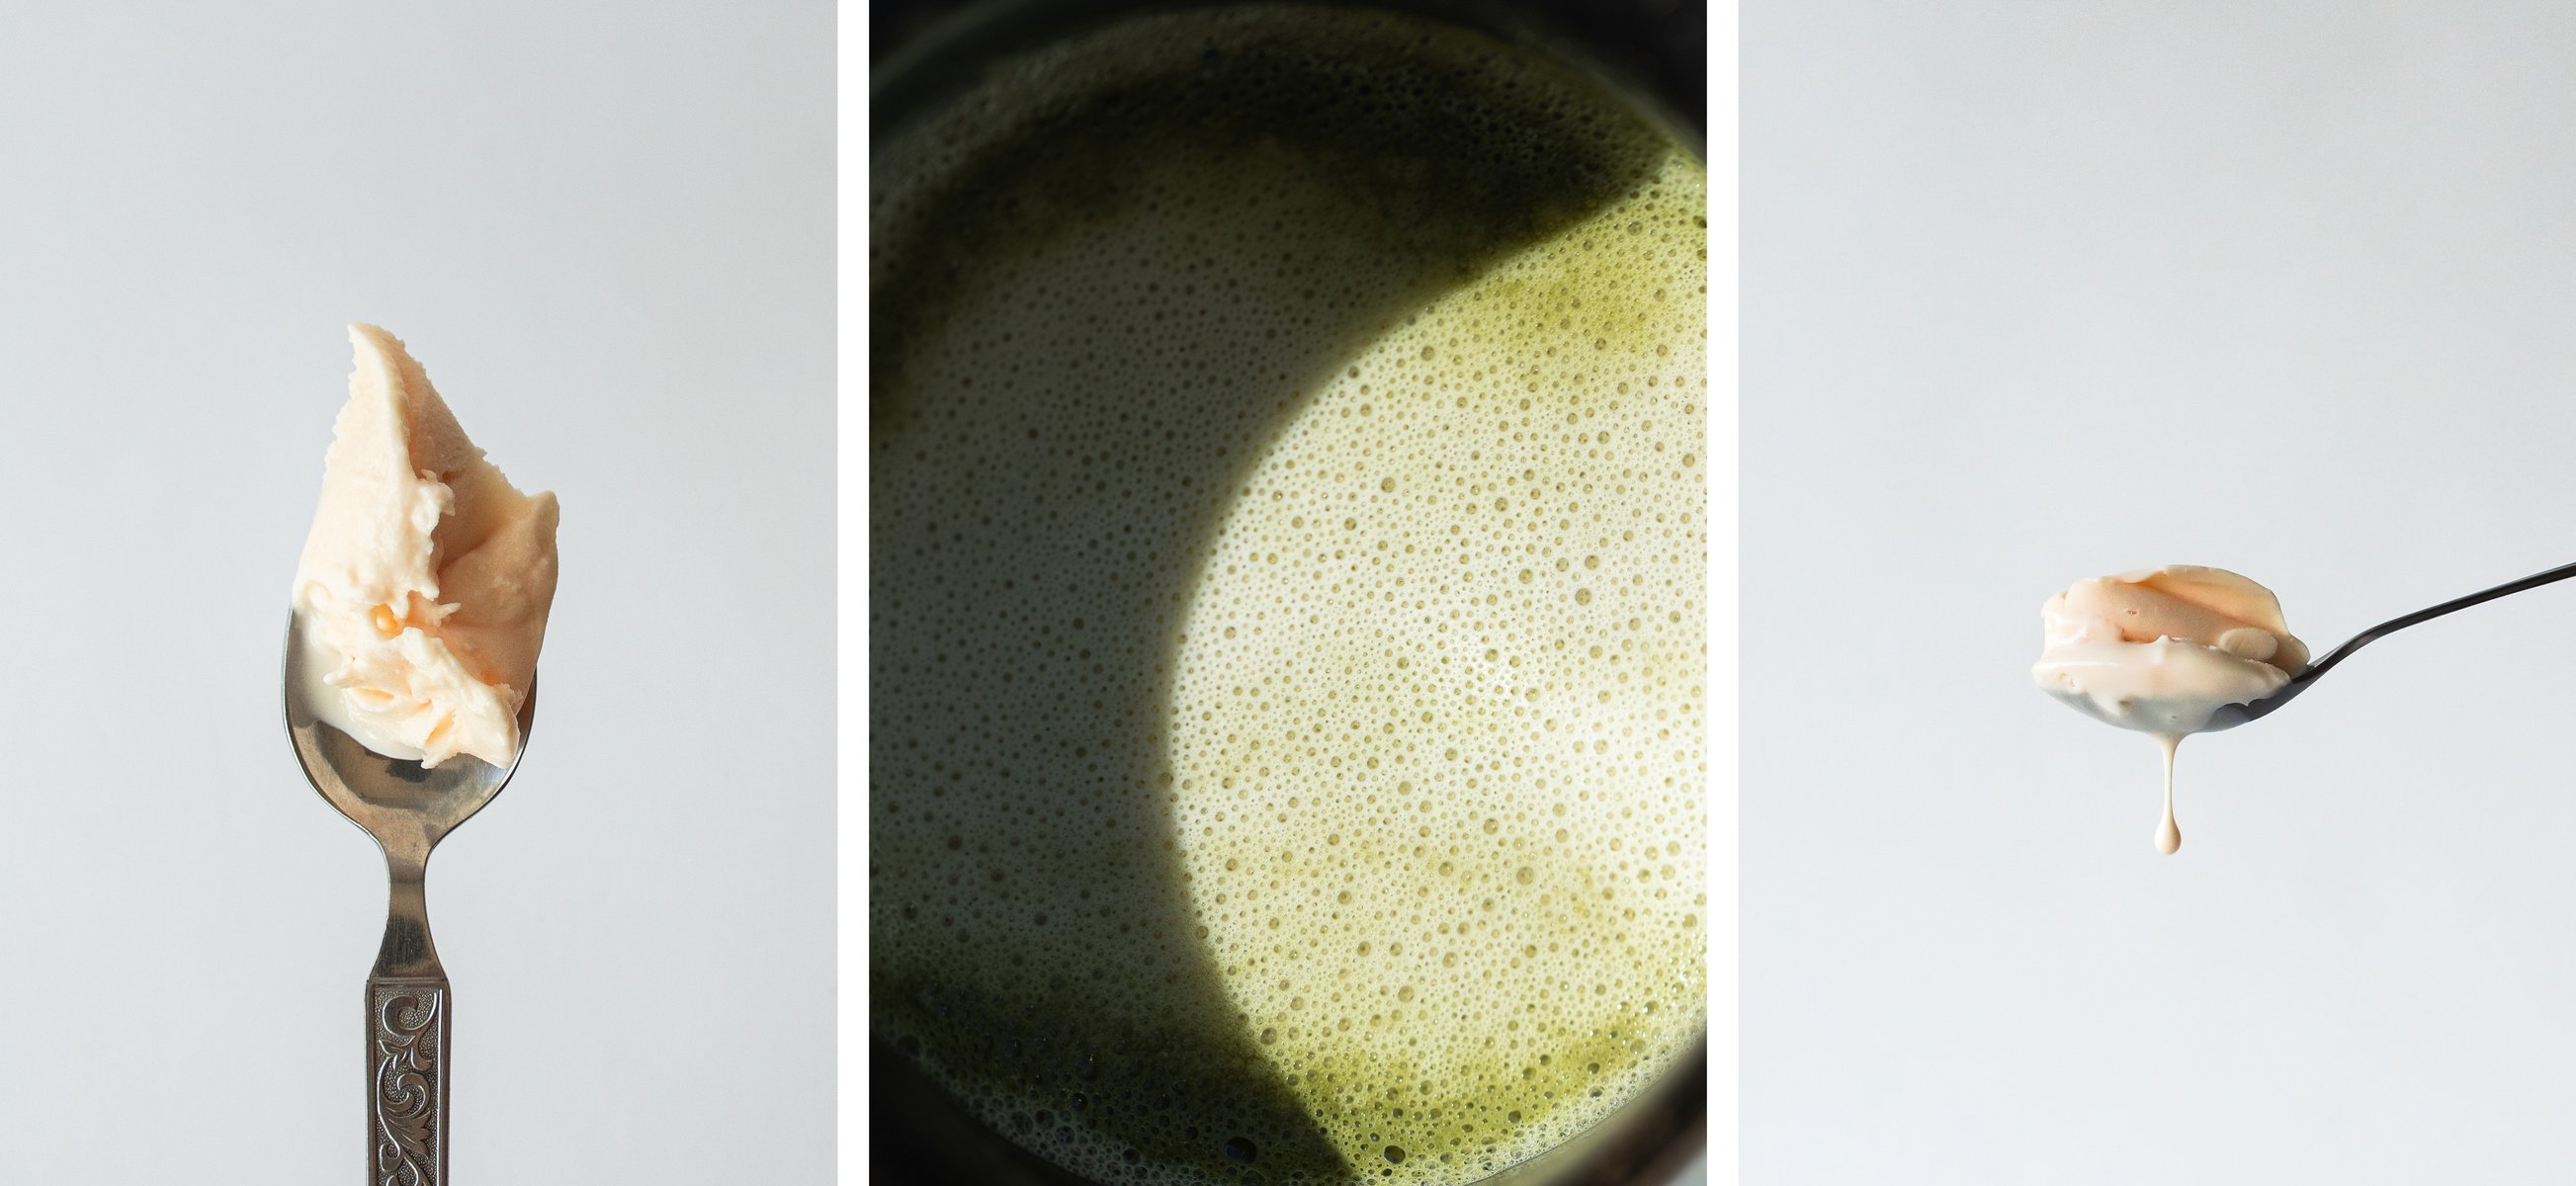  Triptych: 

Left image: a silver spoon with a floral design on the handle standing straight up, holding a small scoop of negroni-flavored gelato.

Center image: a close-up photo of a black mug filled with matcha and oat milk, with the hard light casting a deep, crescent-shaped shadow across half of the frame.

Right image: a spoonful of negroni-flavored gelato that is beginning to melt, with a drop of gelato about to fall from the bottom of the spoon. by Sydney SG